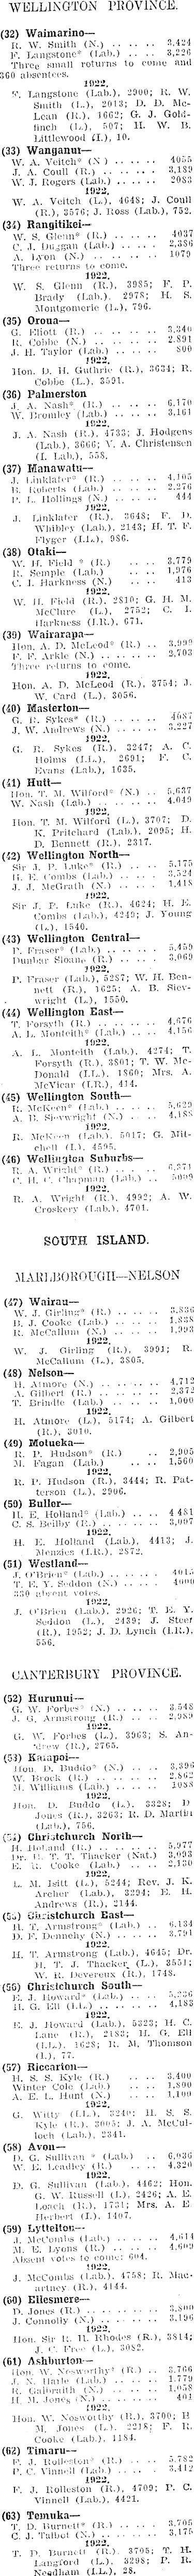 Papers Past Newspapers Horowhenua Chronicle 5 November 1925 Results In Electorates